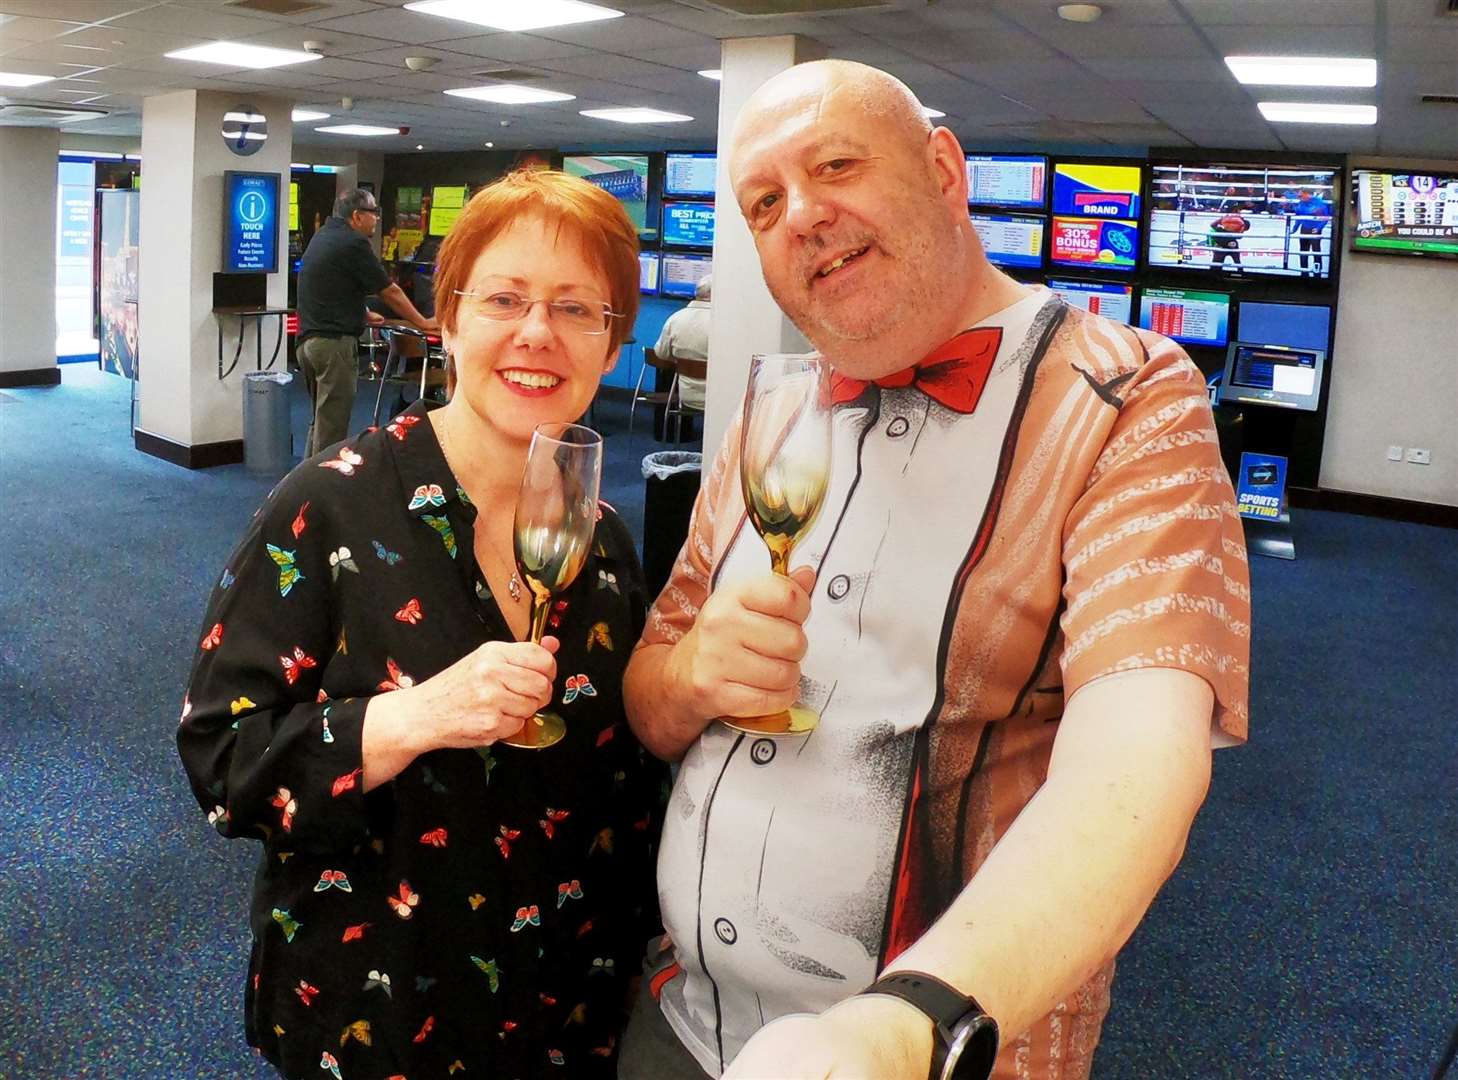 The Gravesend couple visited Coral bookmakers to celebrate 35 years of marriage. The couple spent celebrated their coral anniversary at a Coral bookies. Picture: South West News Service (16052506)